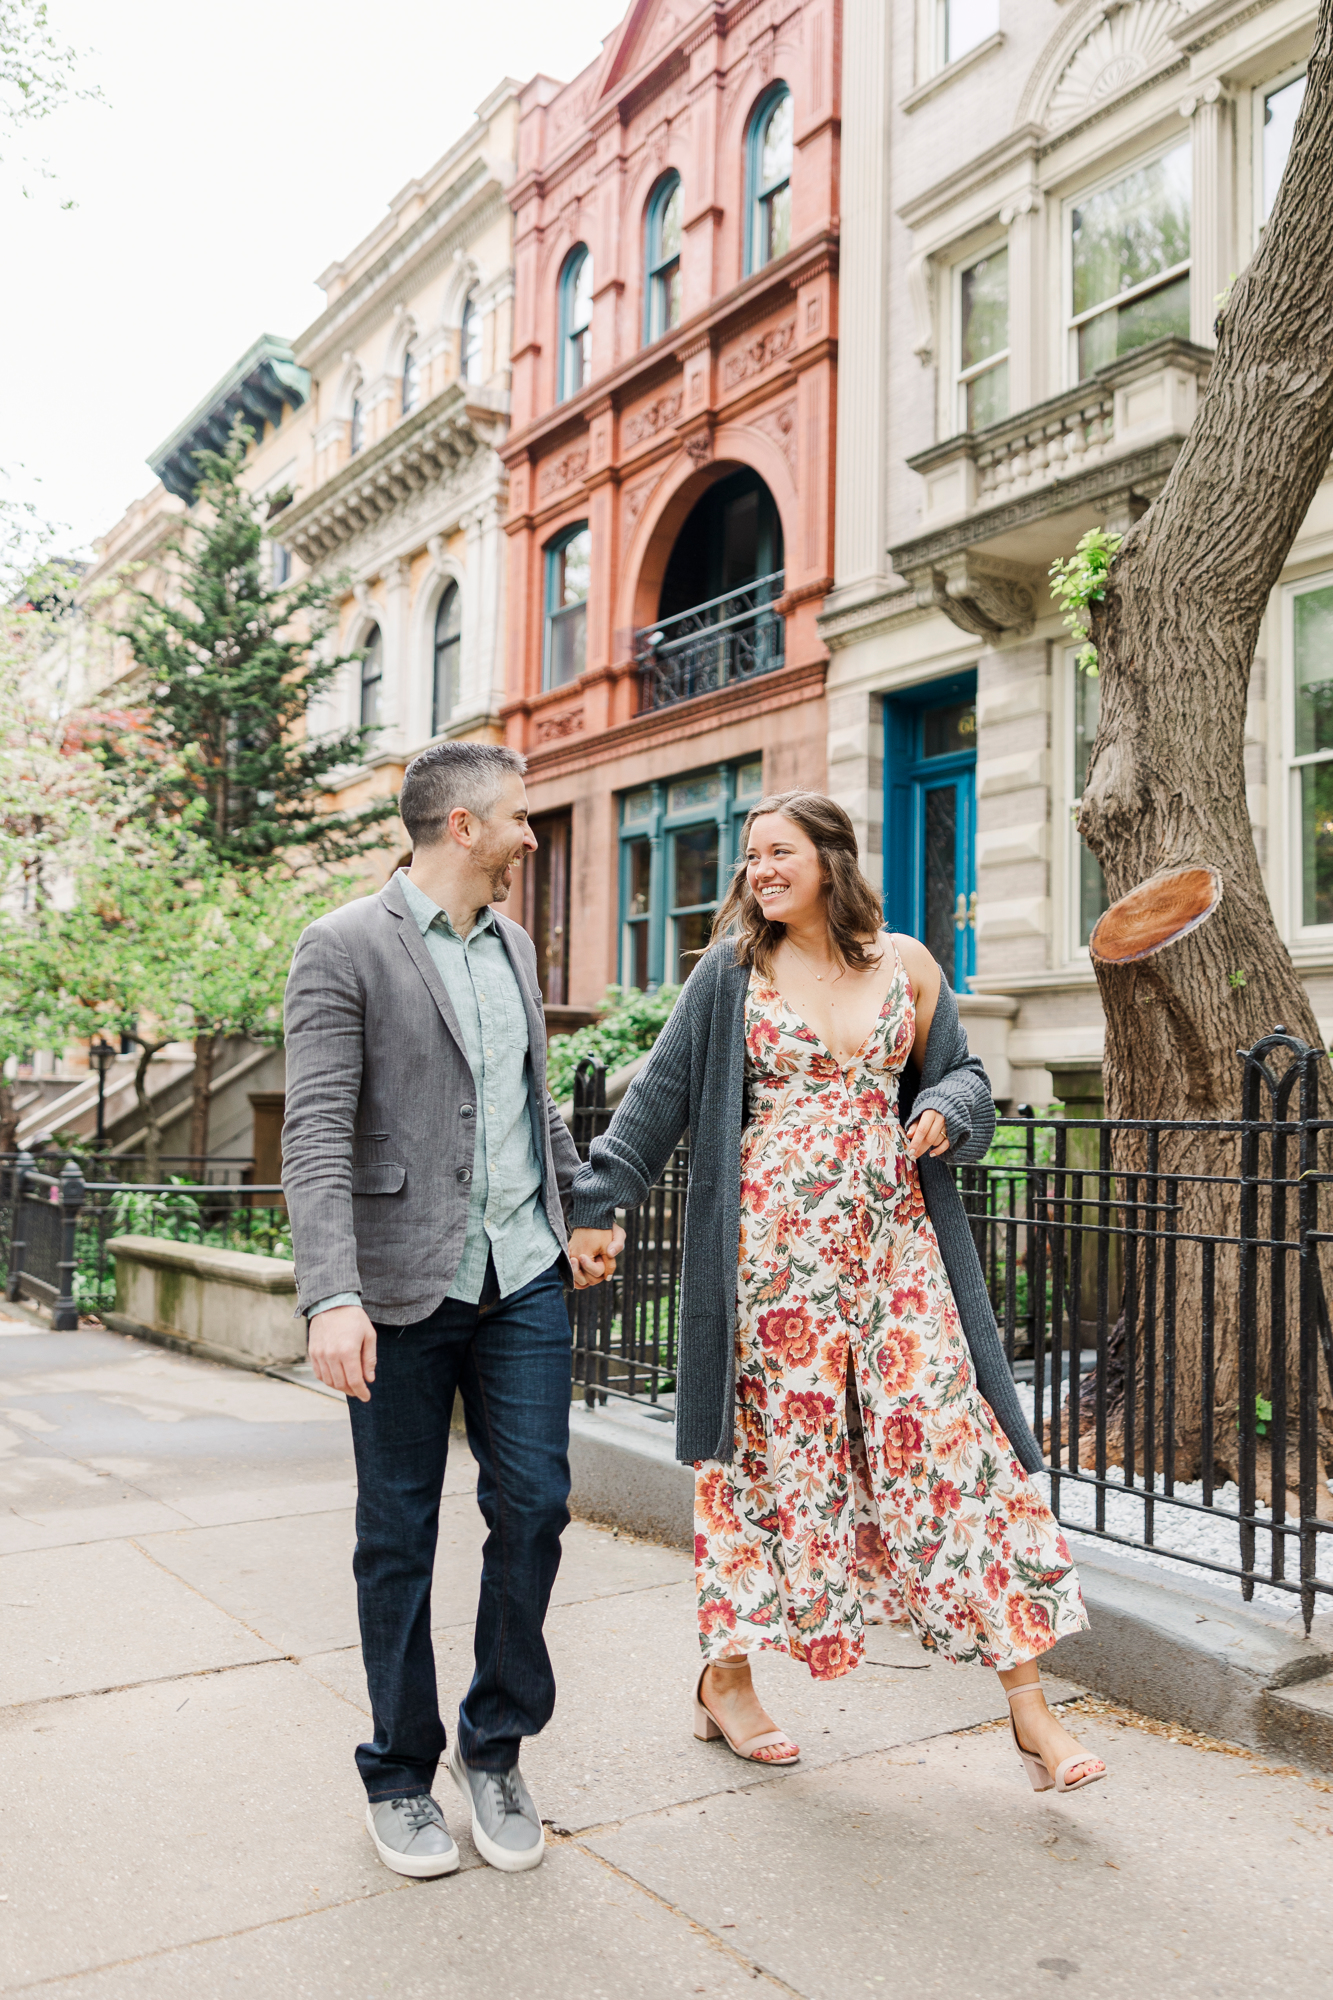 Fun-Filled Prospect Park Engagement Pictures